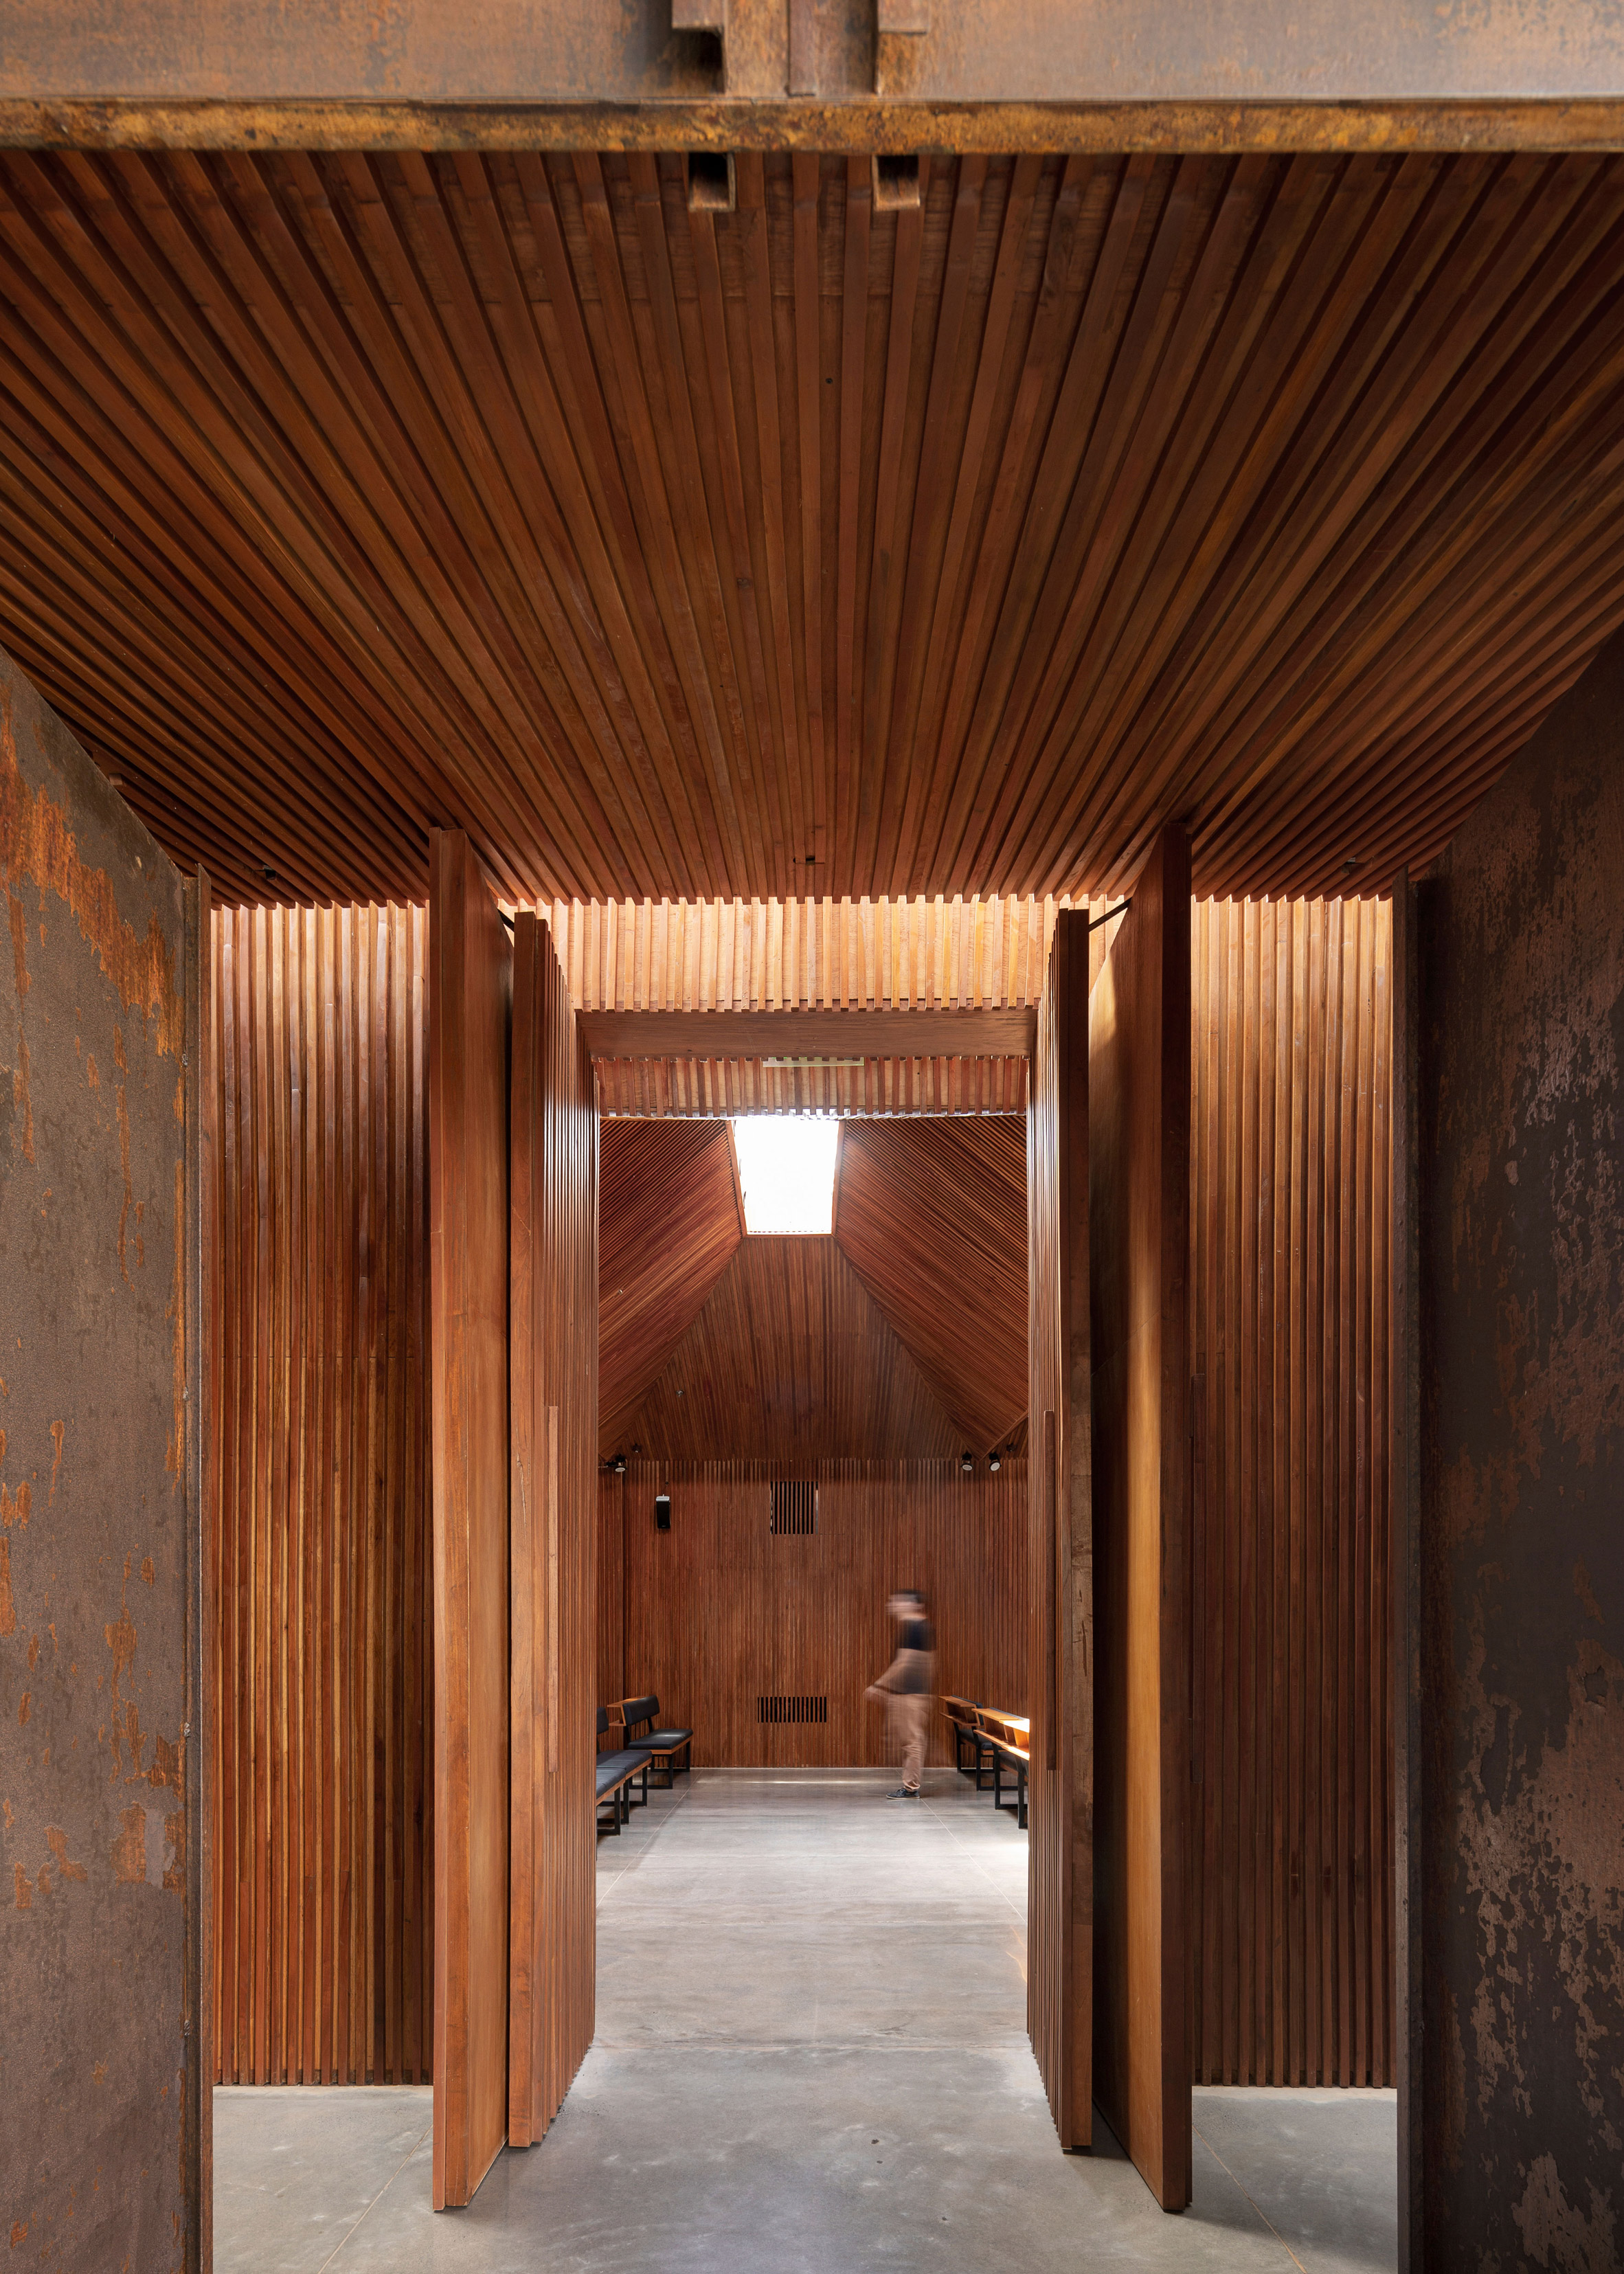 Synagogue at the Hebraic Union of Paraguay by Equipo de Arquitectura